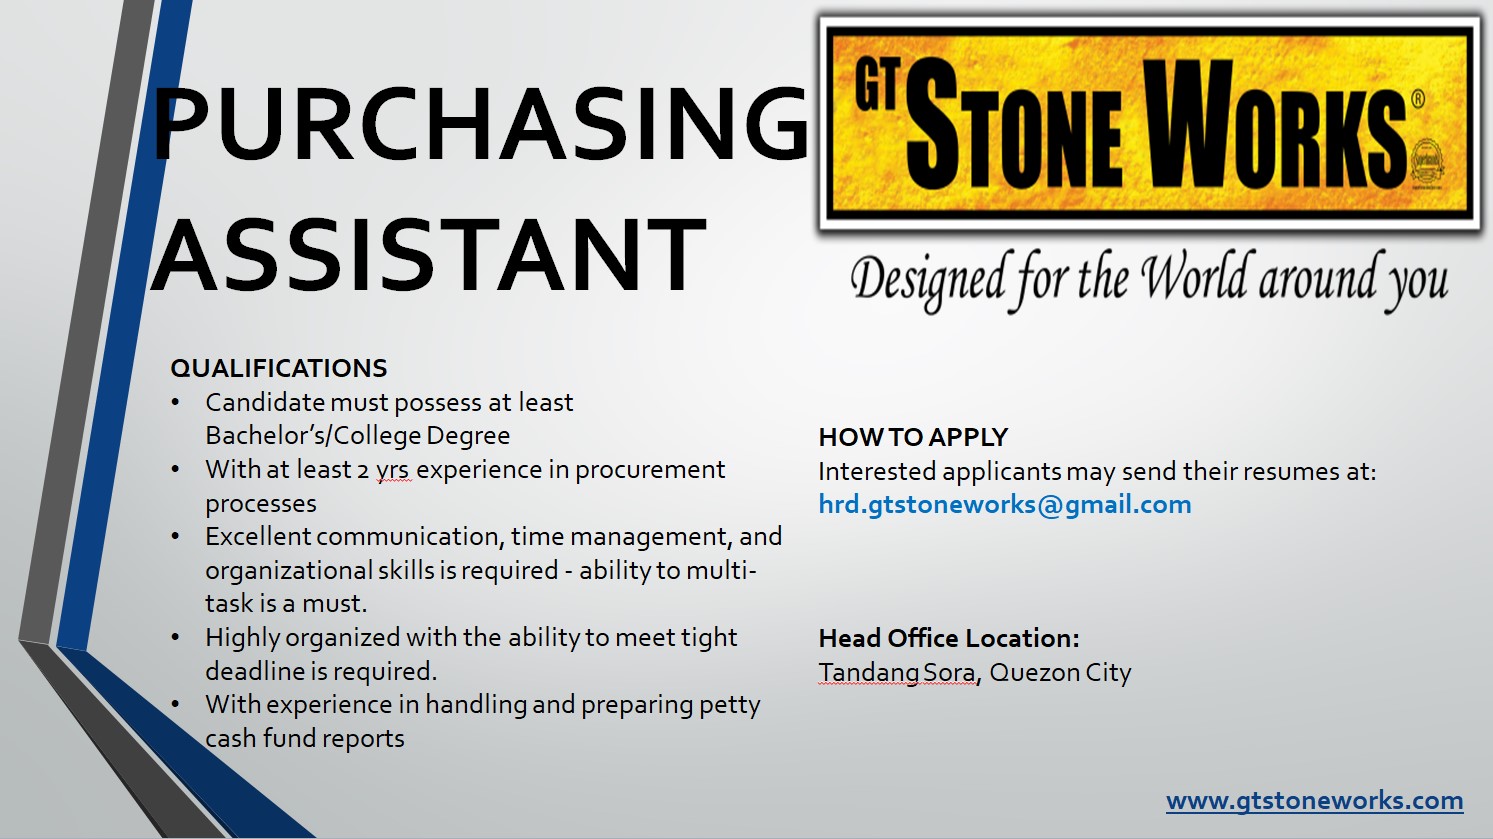 PURCHASING ASSISTANT